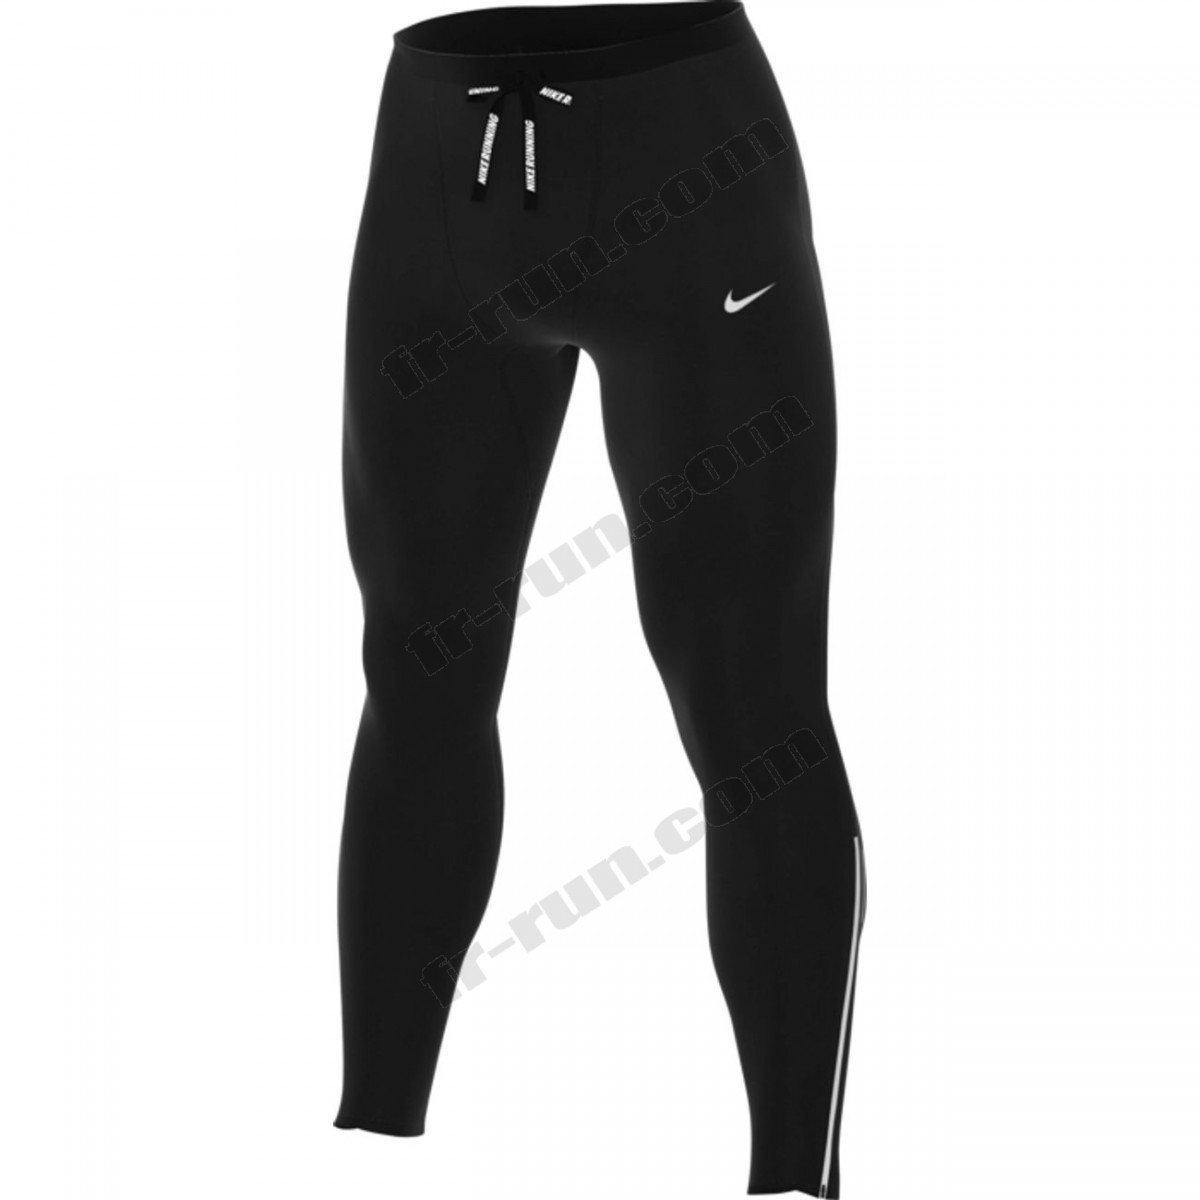 Nike/LEGGING running homme NIKE DF CHLLGR √ Nouveau style √ Soldes - -0